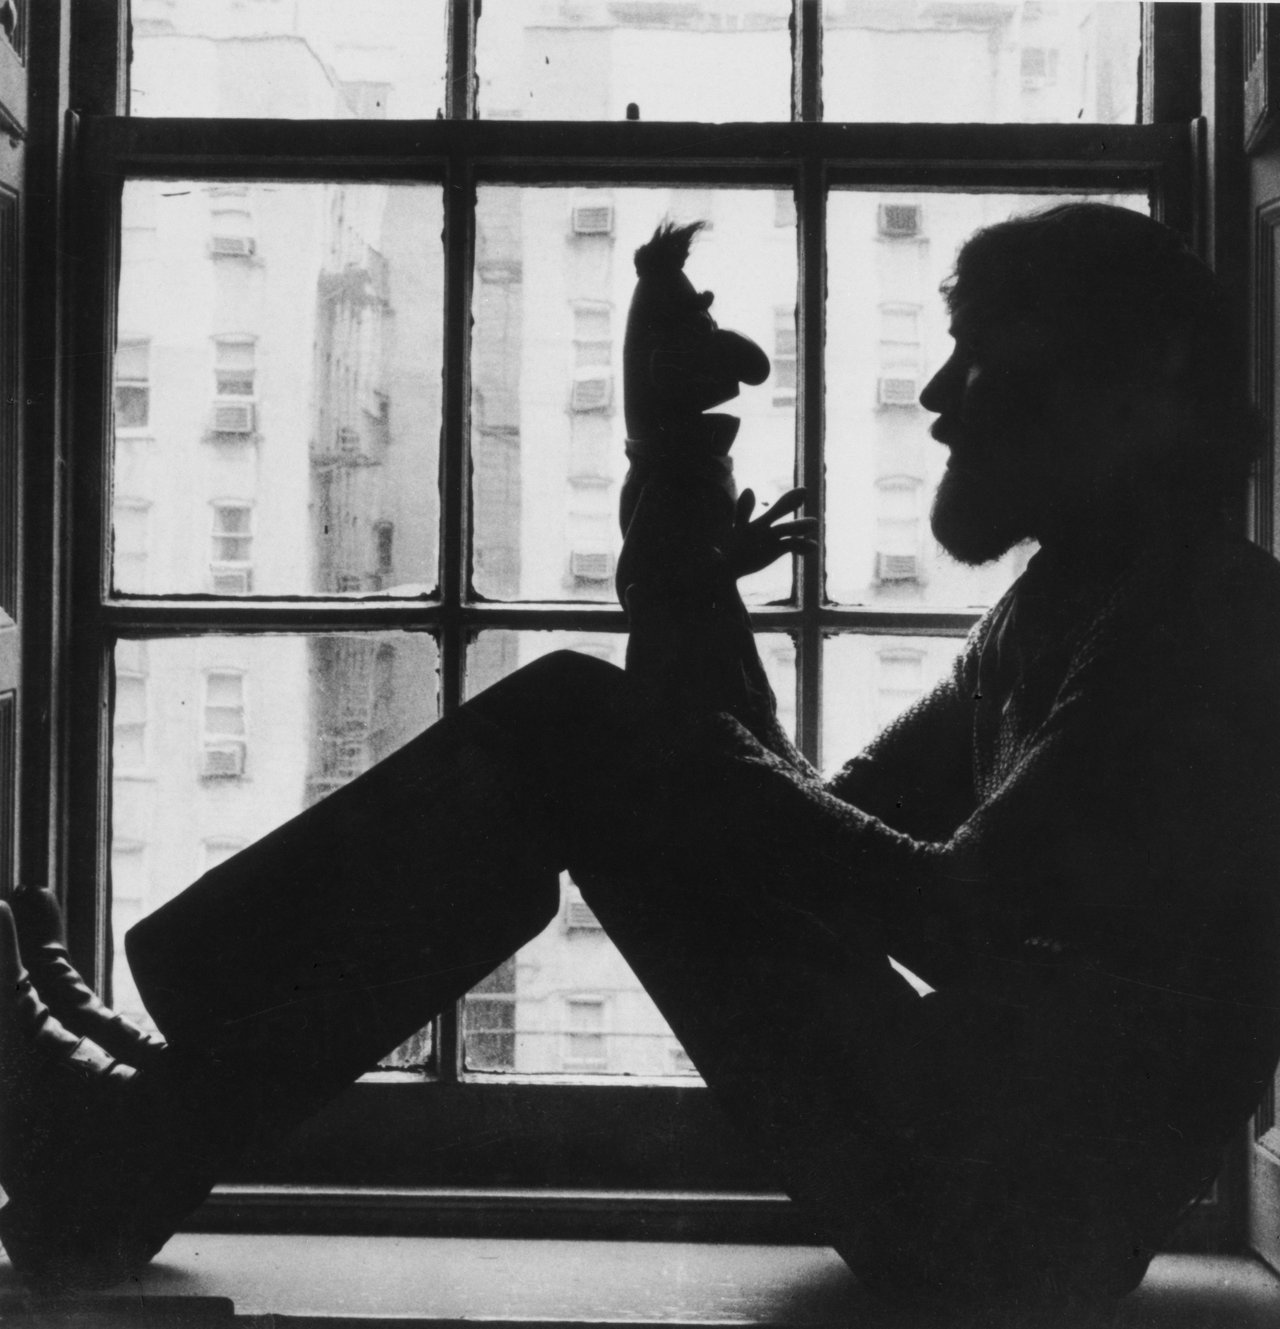 Jim Henson playing with the Bert puppet, 1971